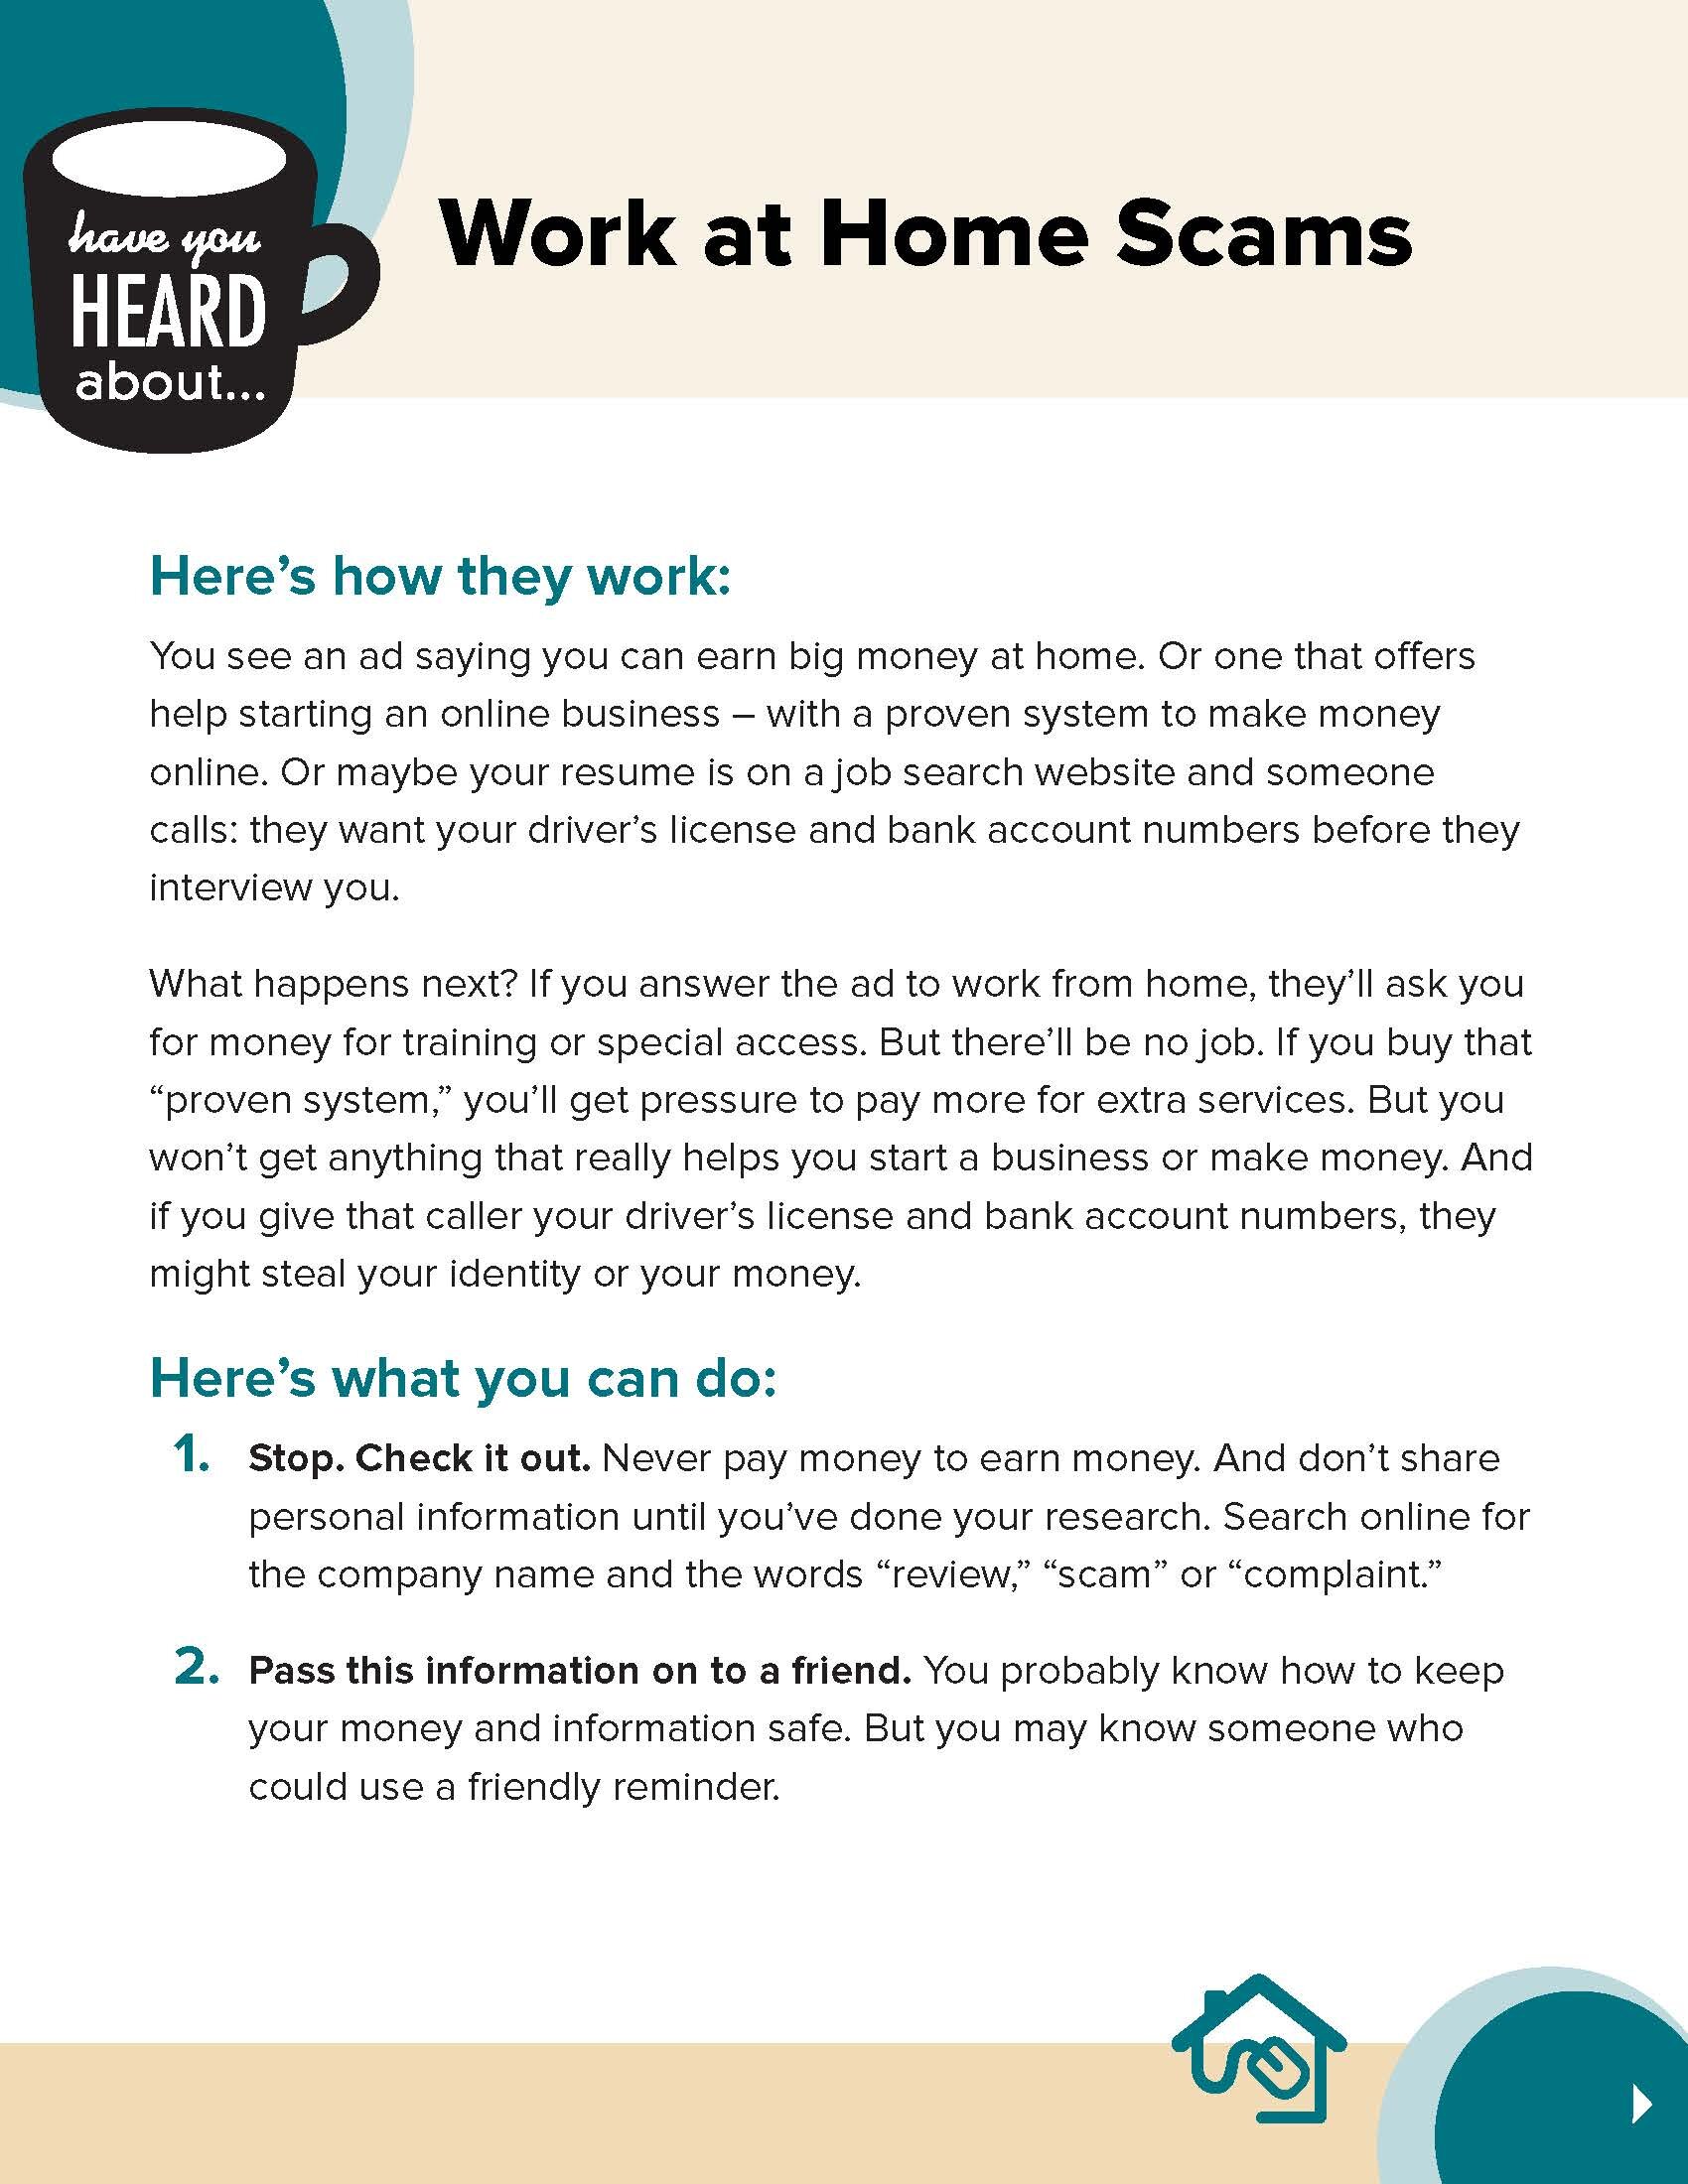 978a-pio-work-home-scams-tearsheet_Page_1.jpg